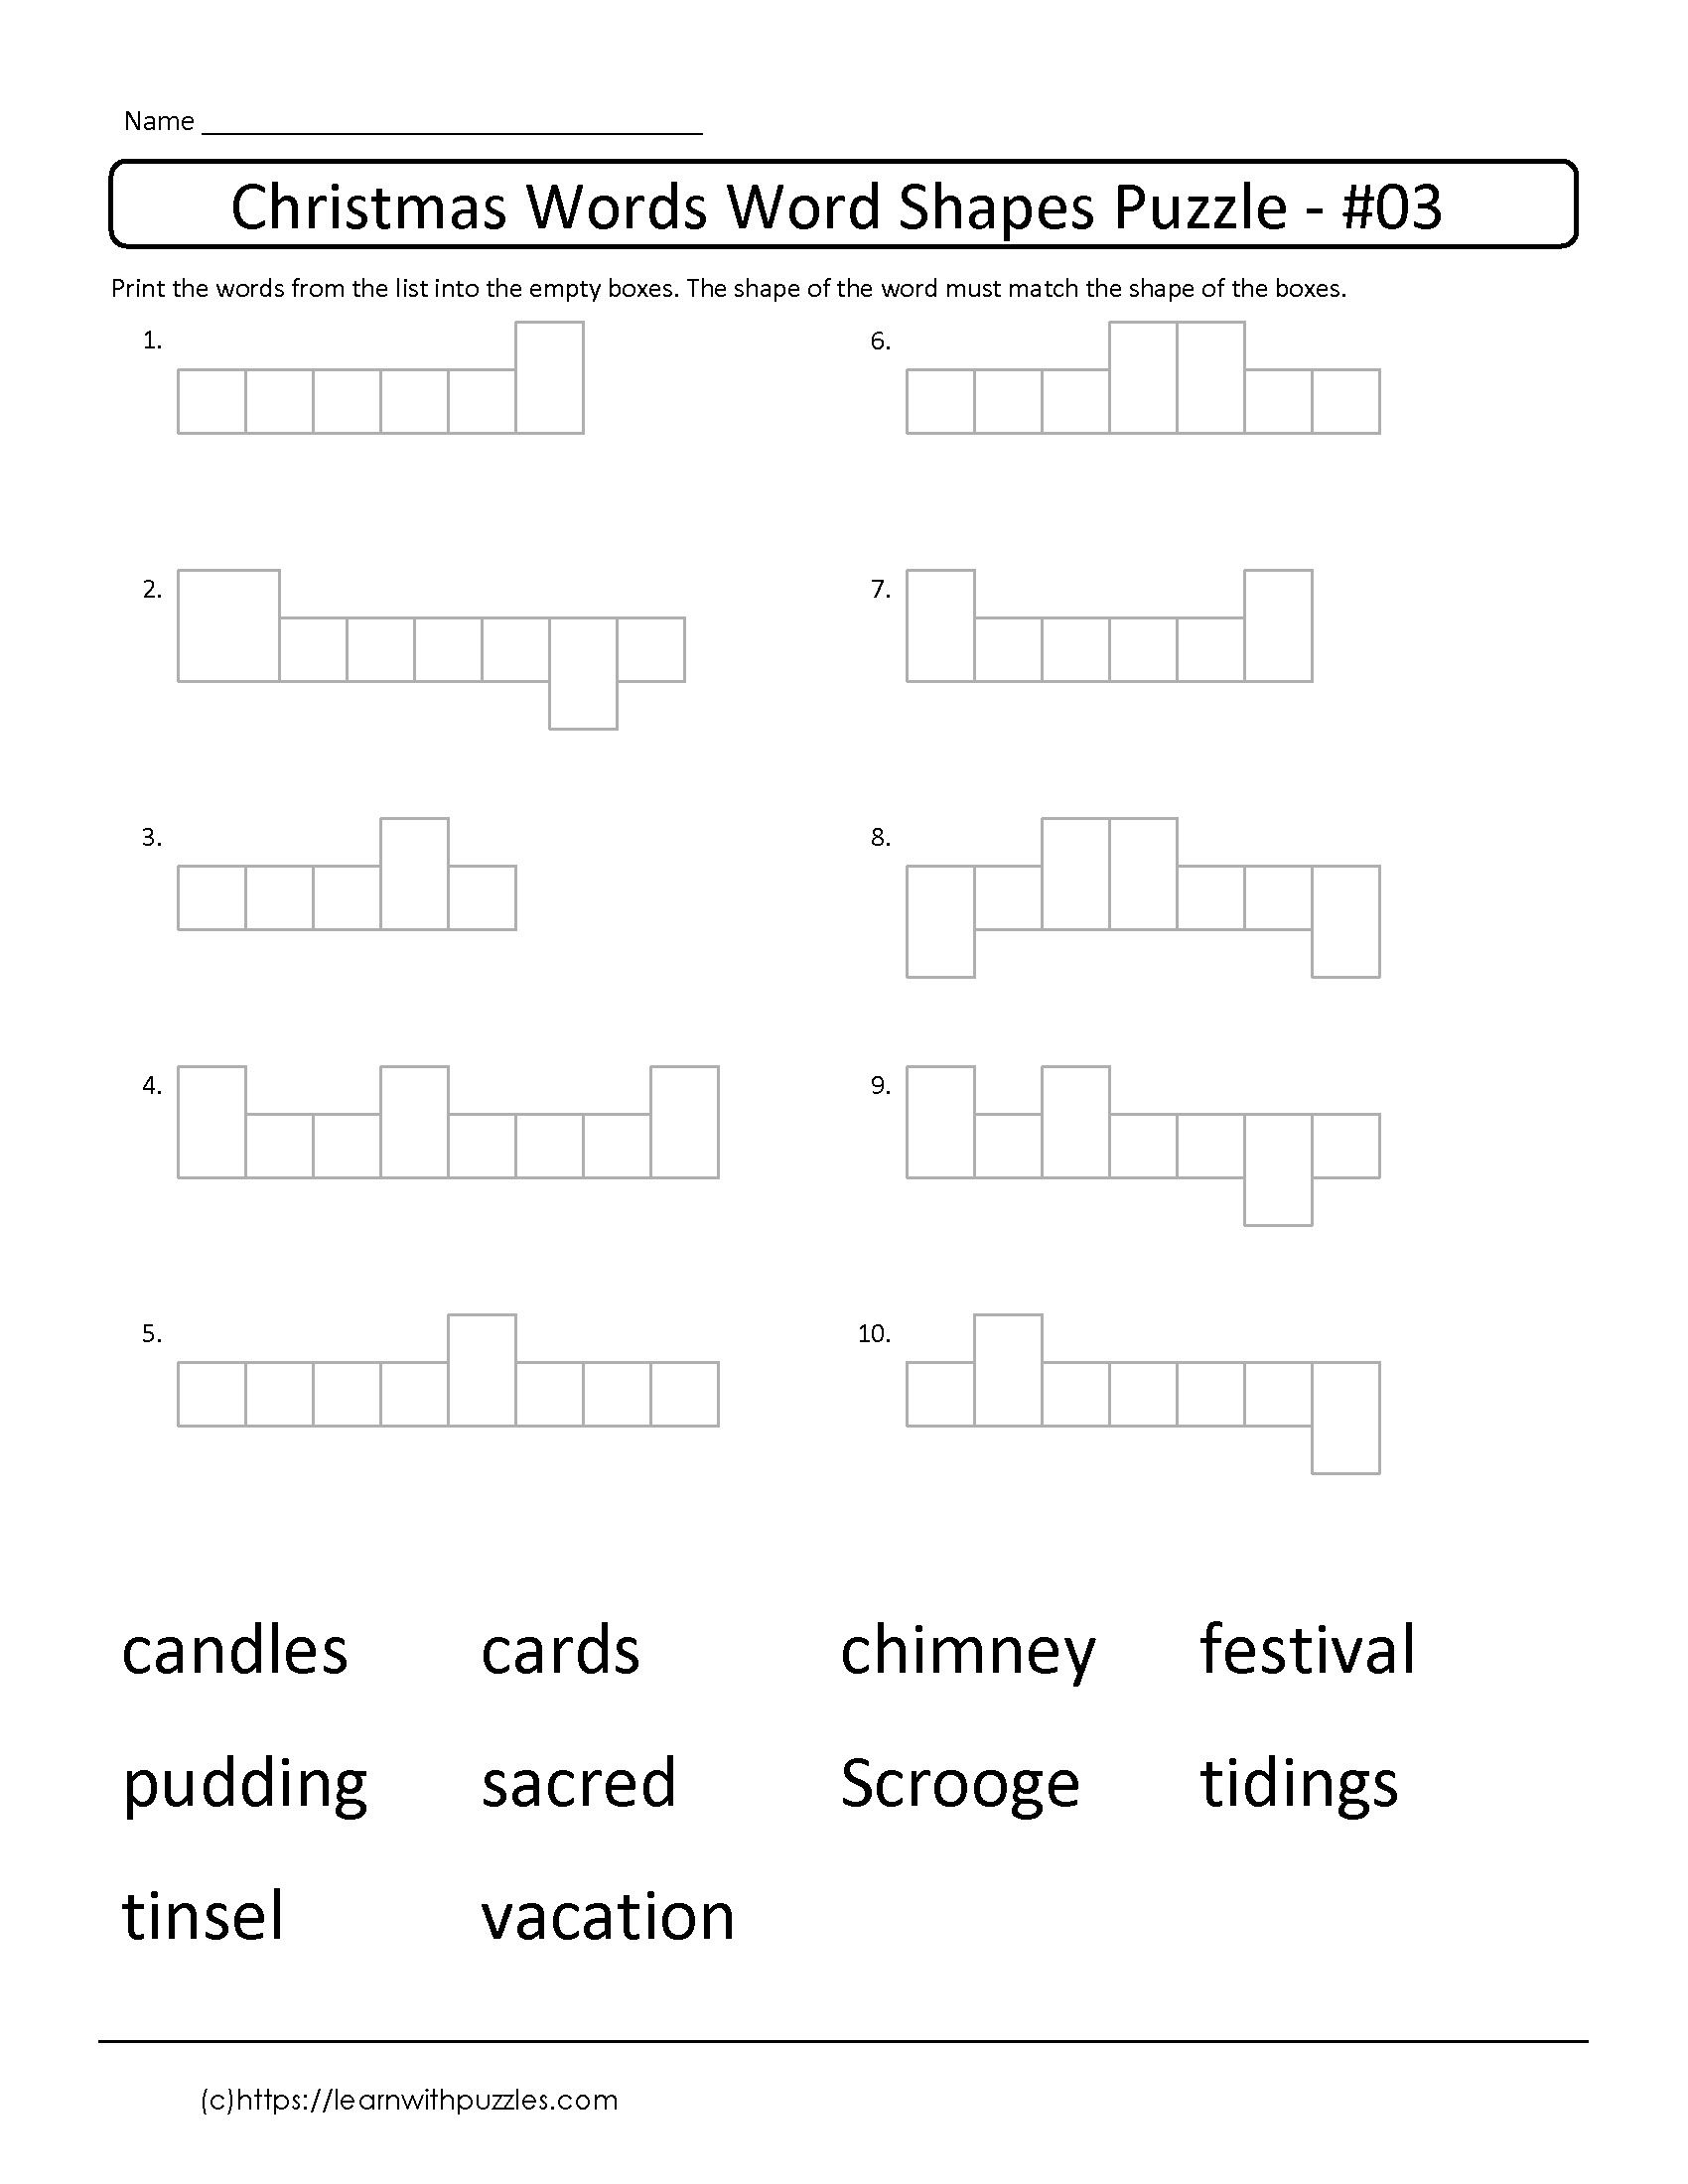 Printable And Free Xmas Word Shapes Puzzles To Help Kids Remember - Printable Holiday Puzzles